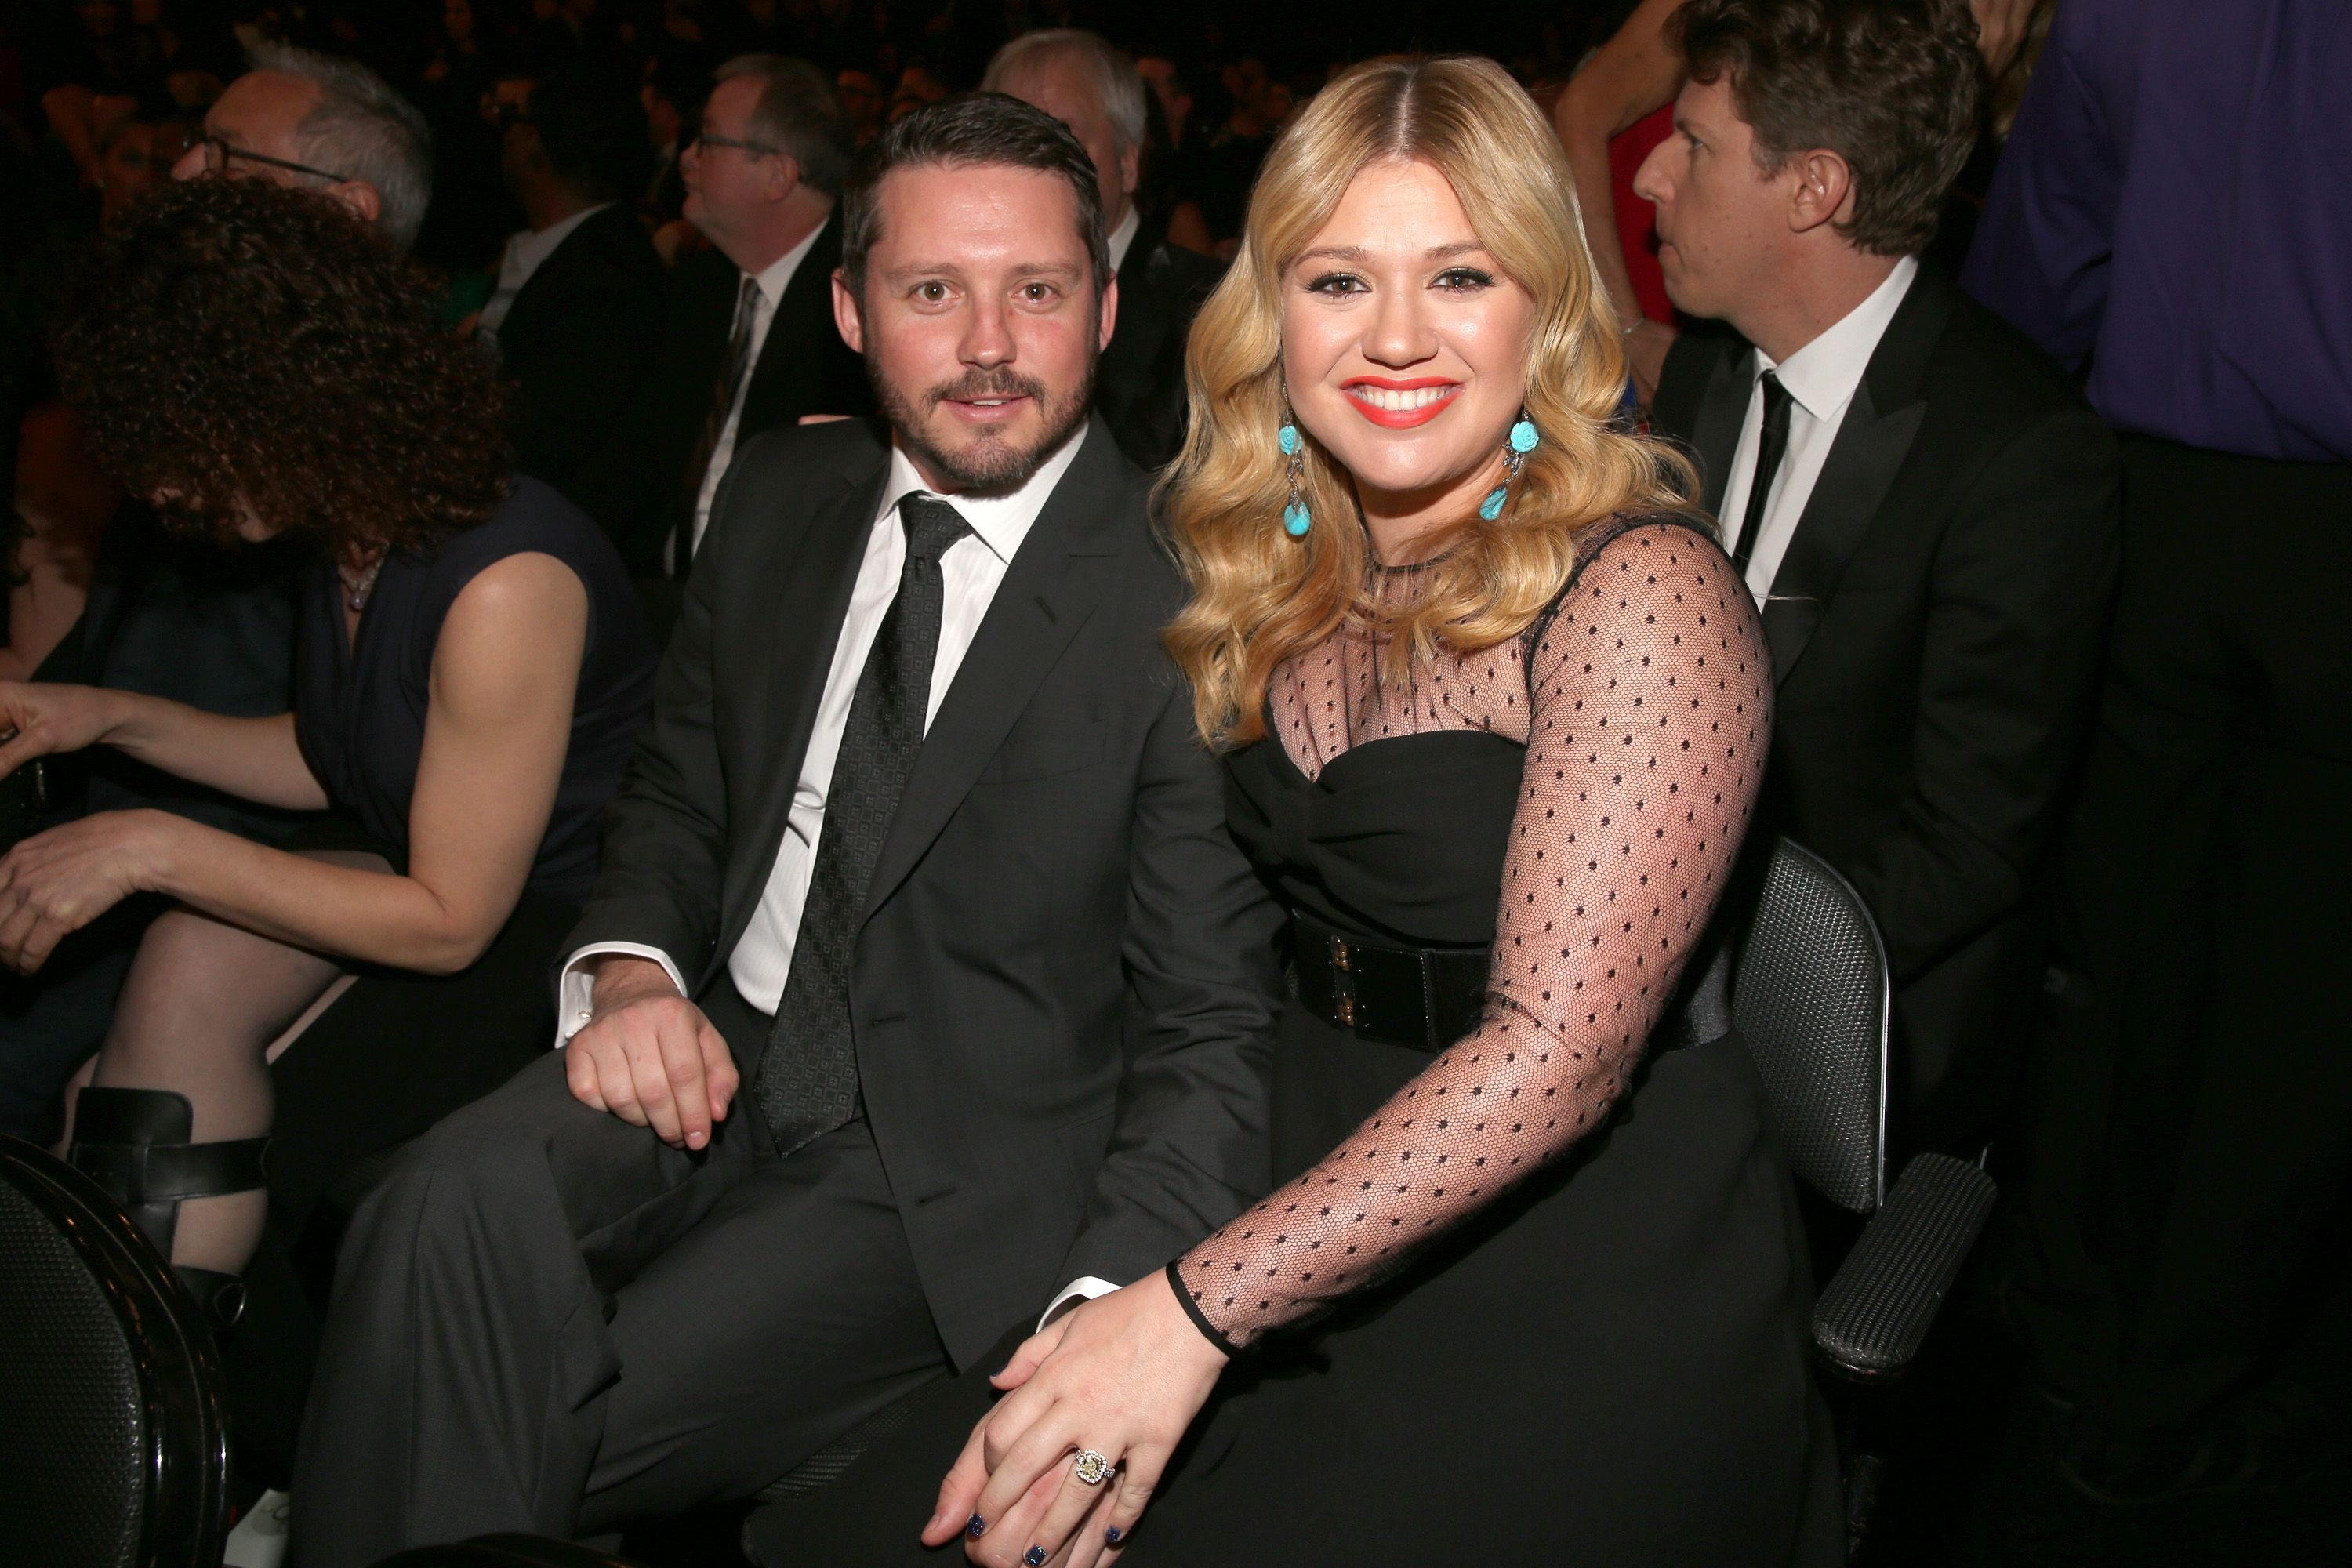 Brandon Blackstock and Kelly Clarkson during the 55th Annual Grammy Awards on February 10, 2013, in Los Angeles, California | Source: Getty Images